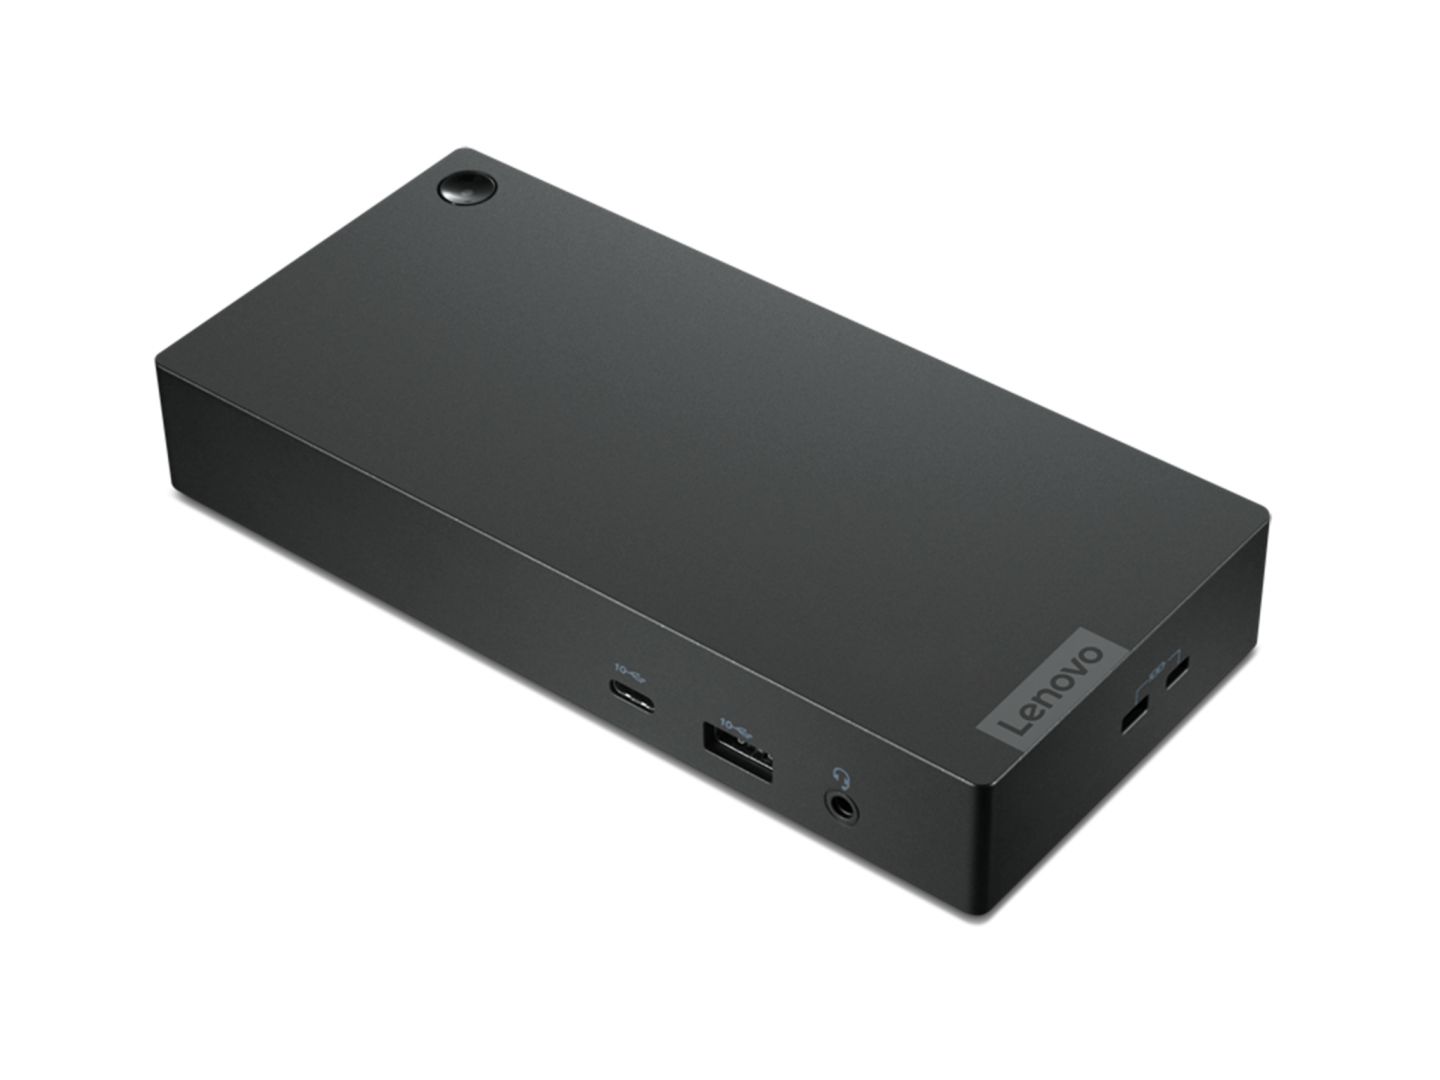 Lenovo USB-C Dock (Windows Only), Video Ports: 2 x Display Port,1 x HDMI Port, Output Power: 65W with 90W power adapter connected_3